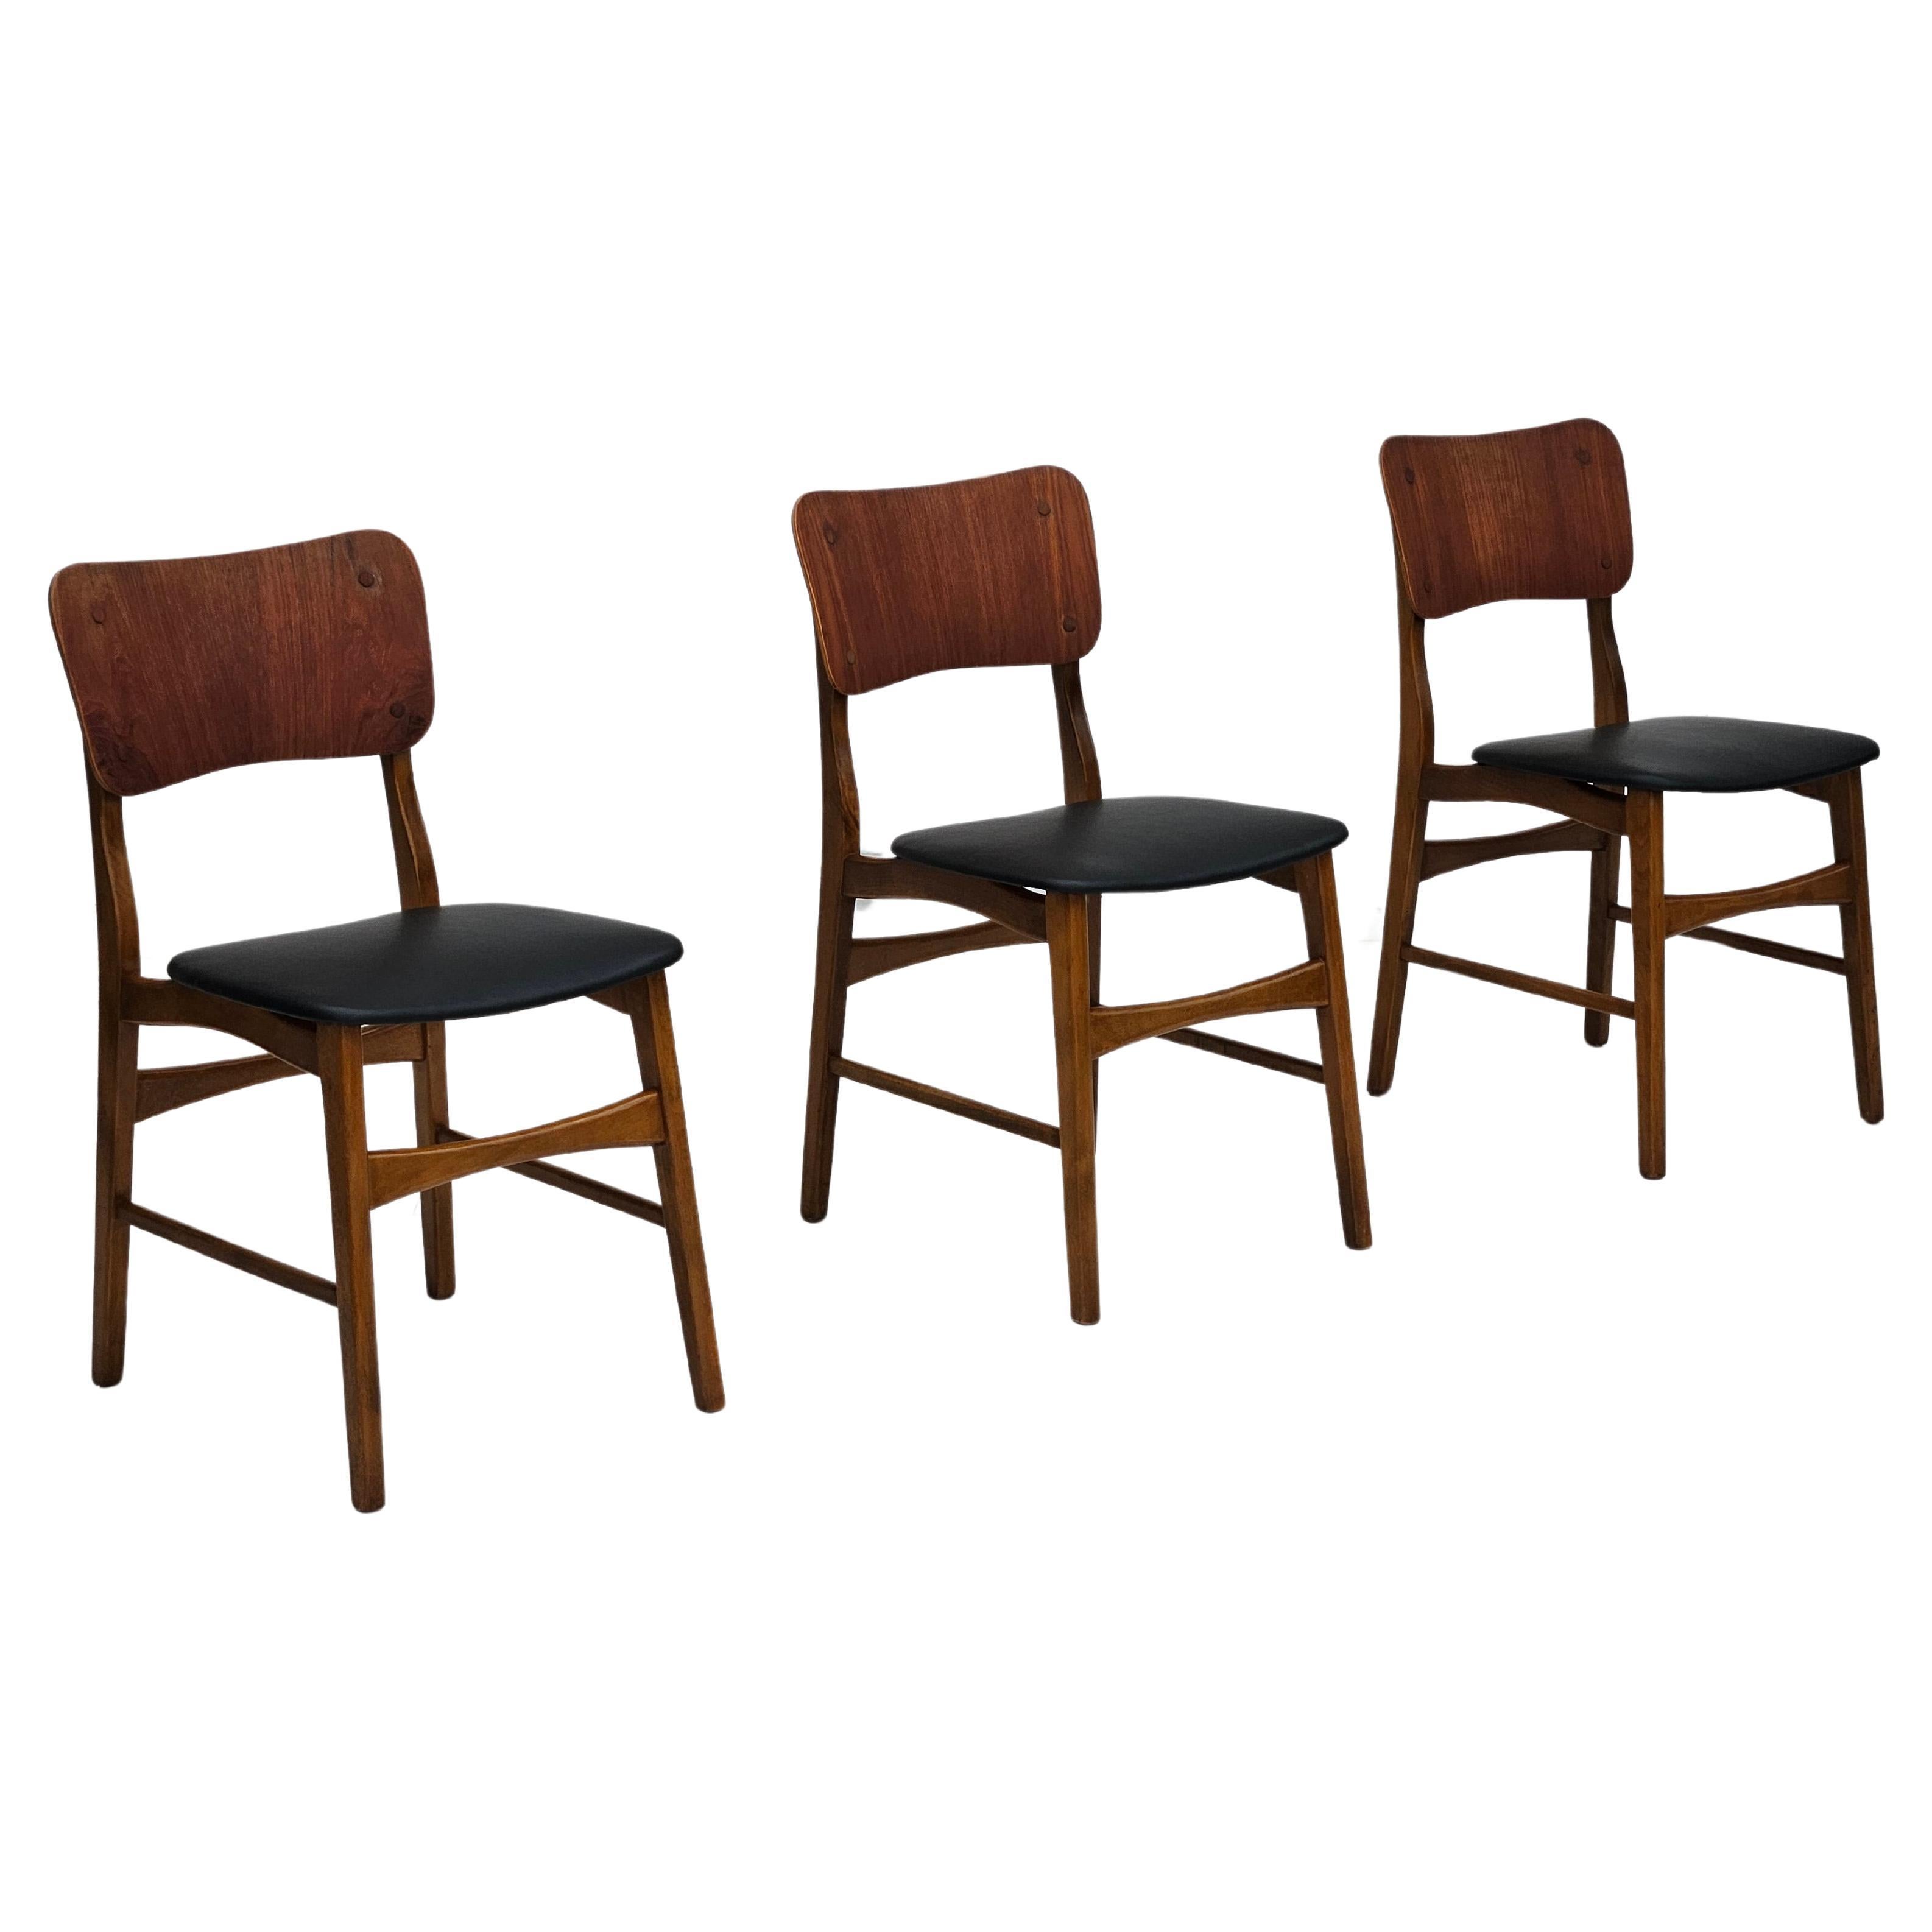 1960s, Danish design by Ib Kofod Larsen, set of 3 dining chairs model 62. For Sale